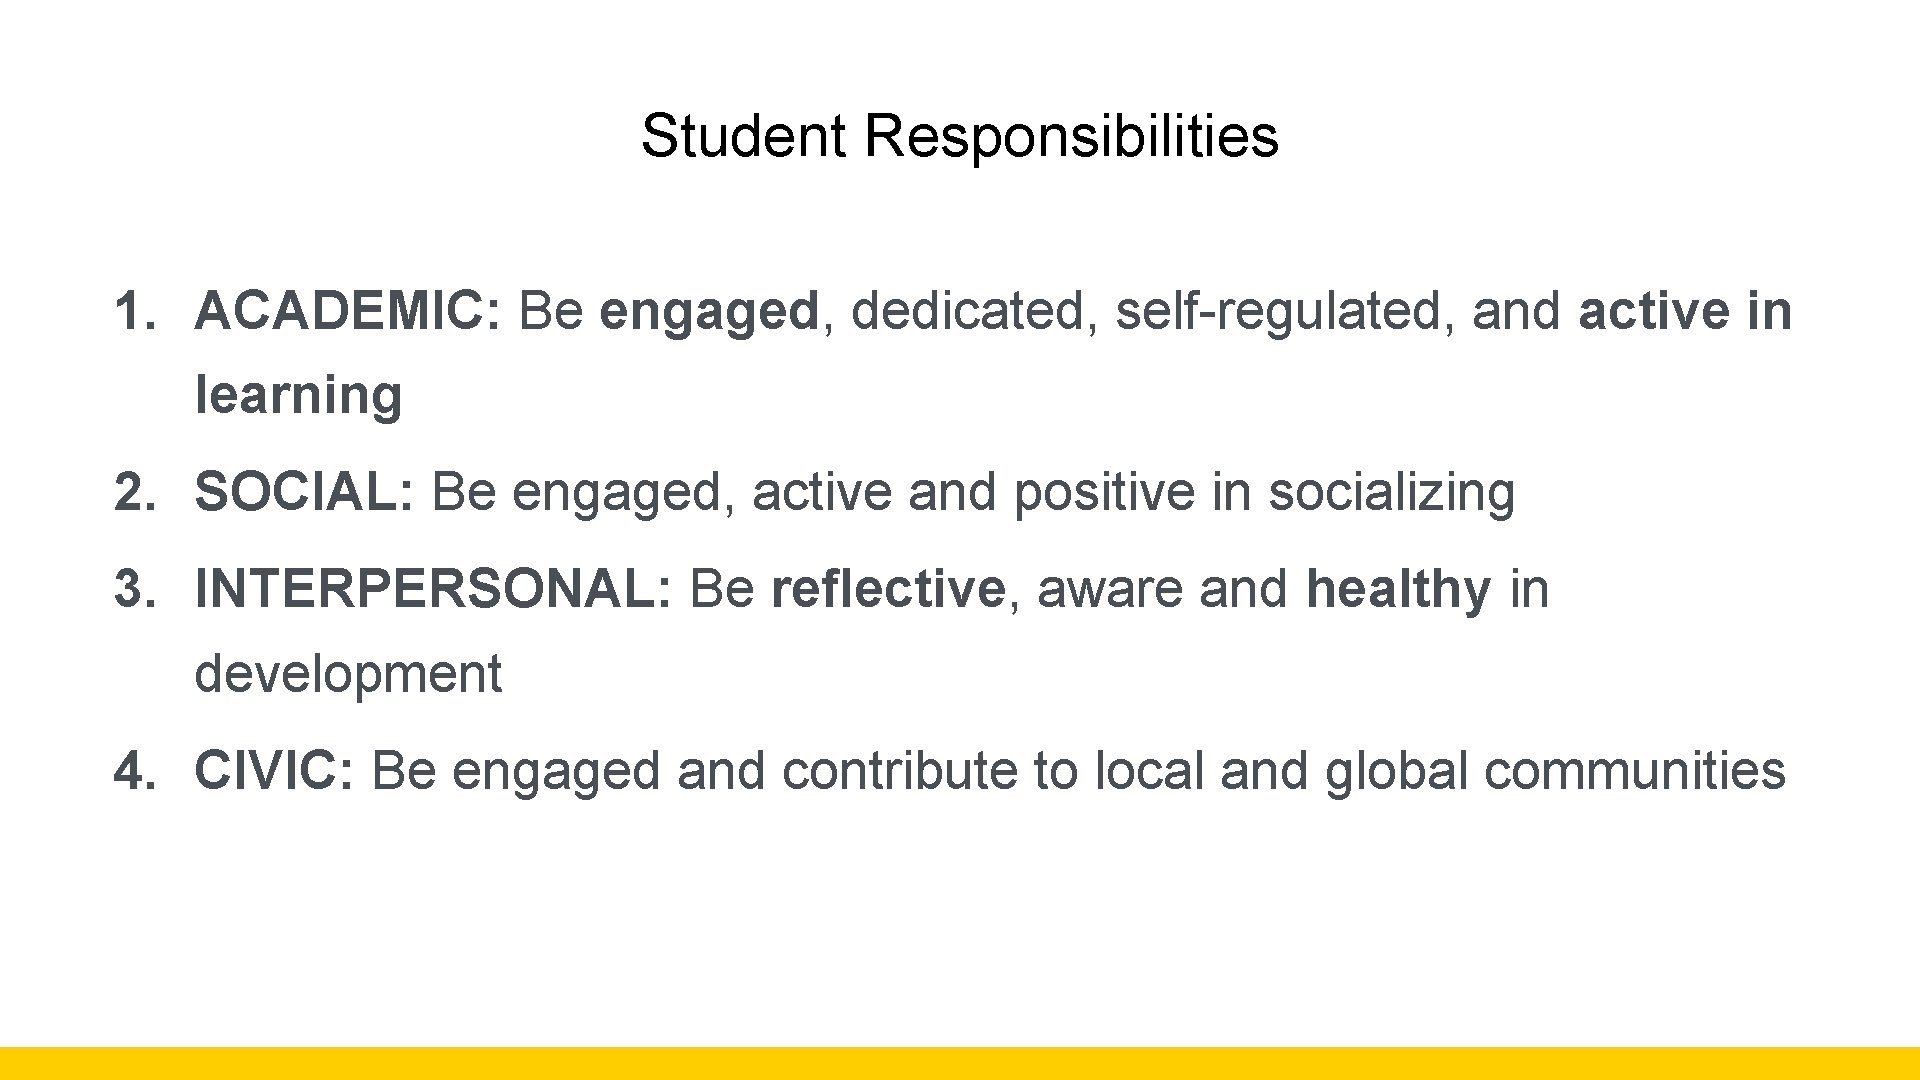 Student Responsibilities 1. ACADEMIC: Be engaged, dedicated, self-regulated, and active in learning 2. SOCIAL: